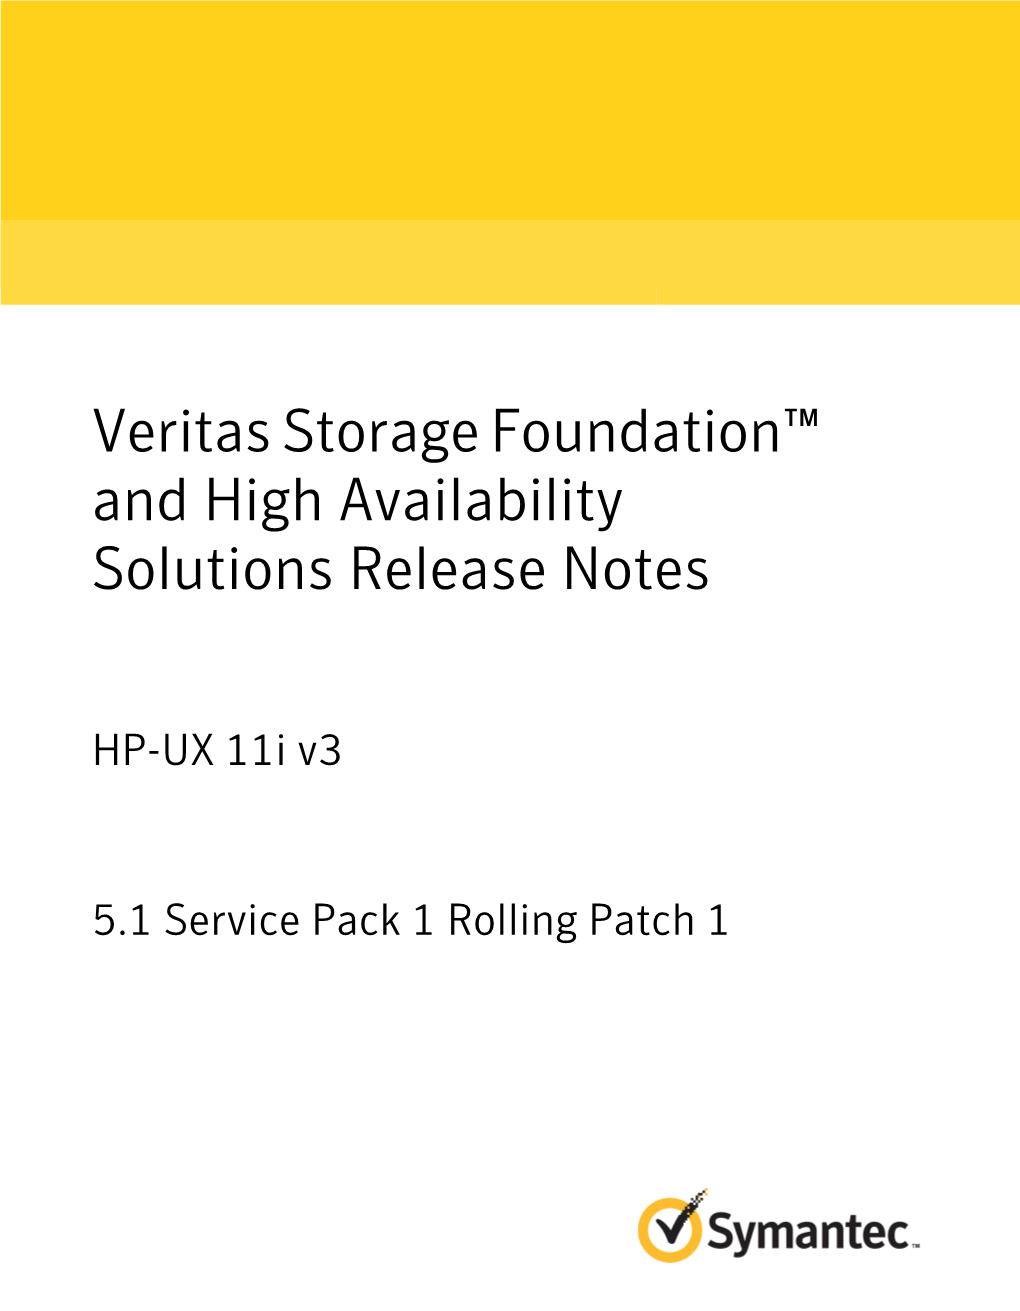 Veritas Storage Foundation™ and High Availability Solutions Release Notes